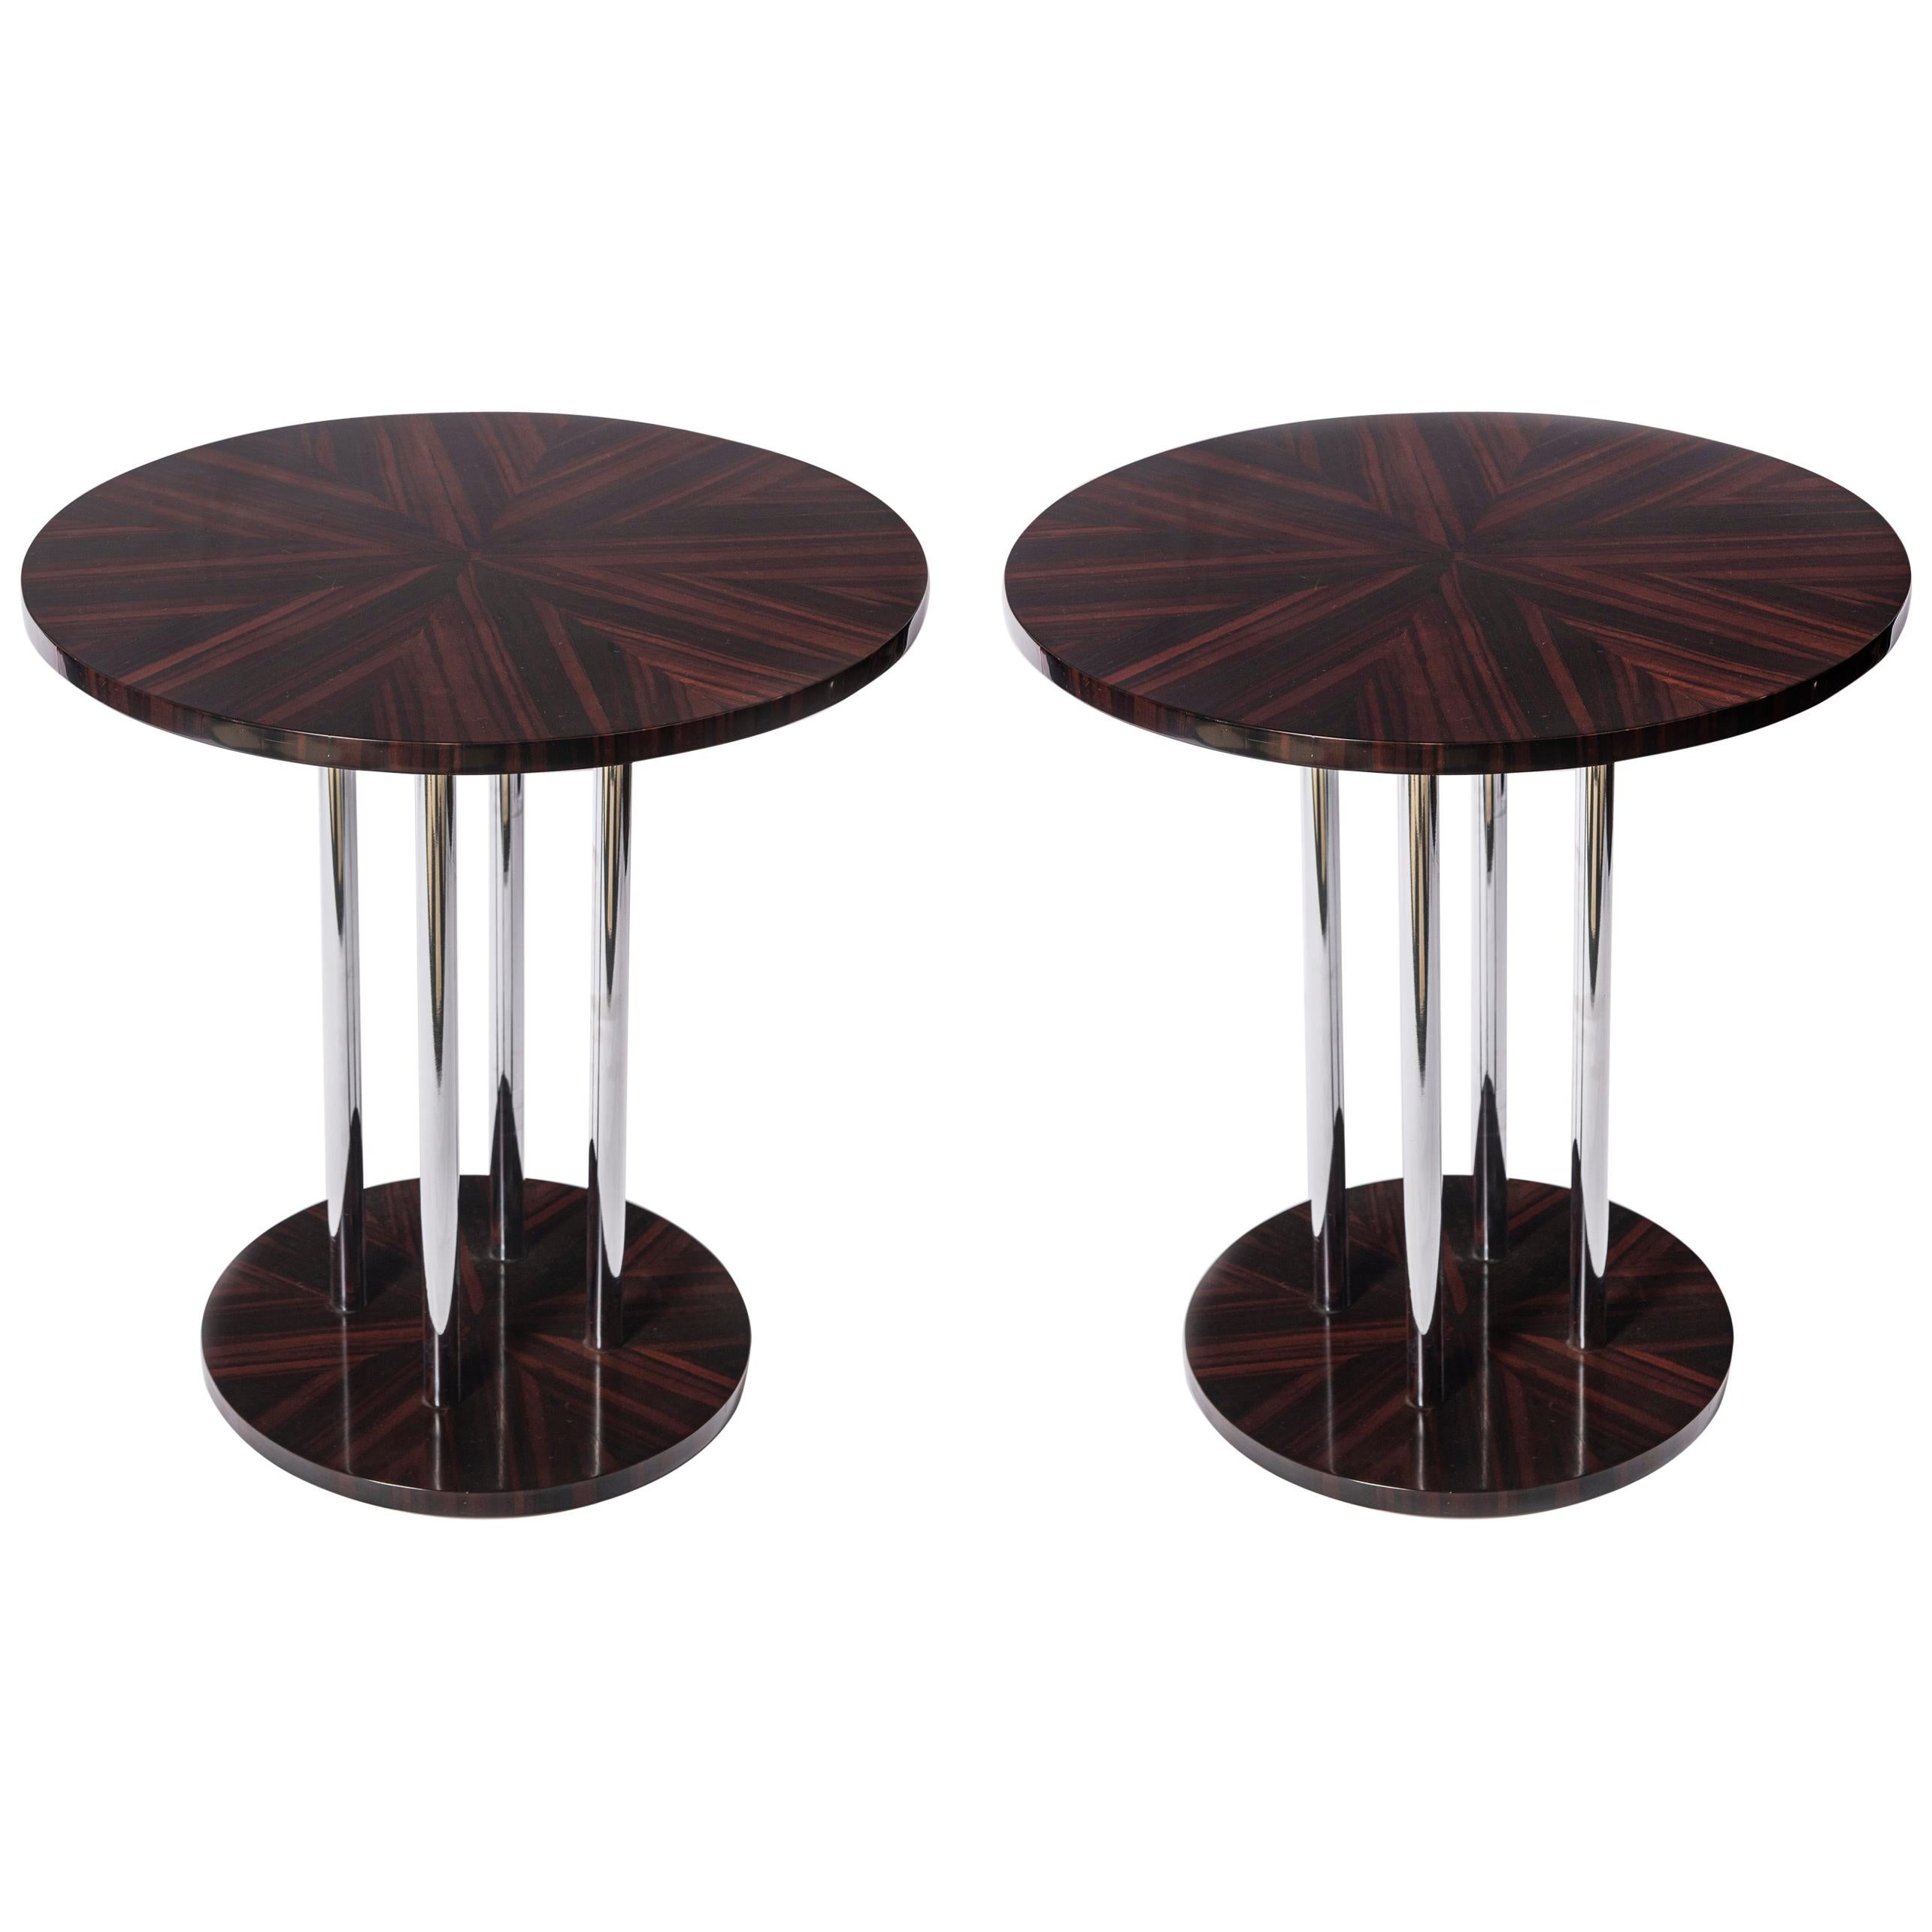 Pair of Wood and Chrome Metal Side Tables, Art Deco Period, France, circa 1940 For Sale